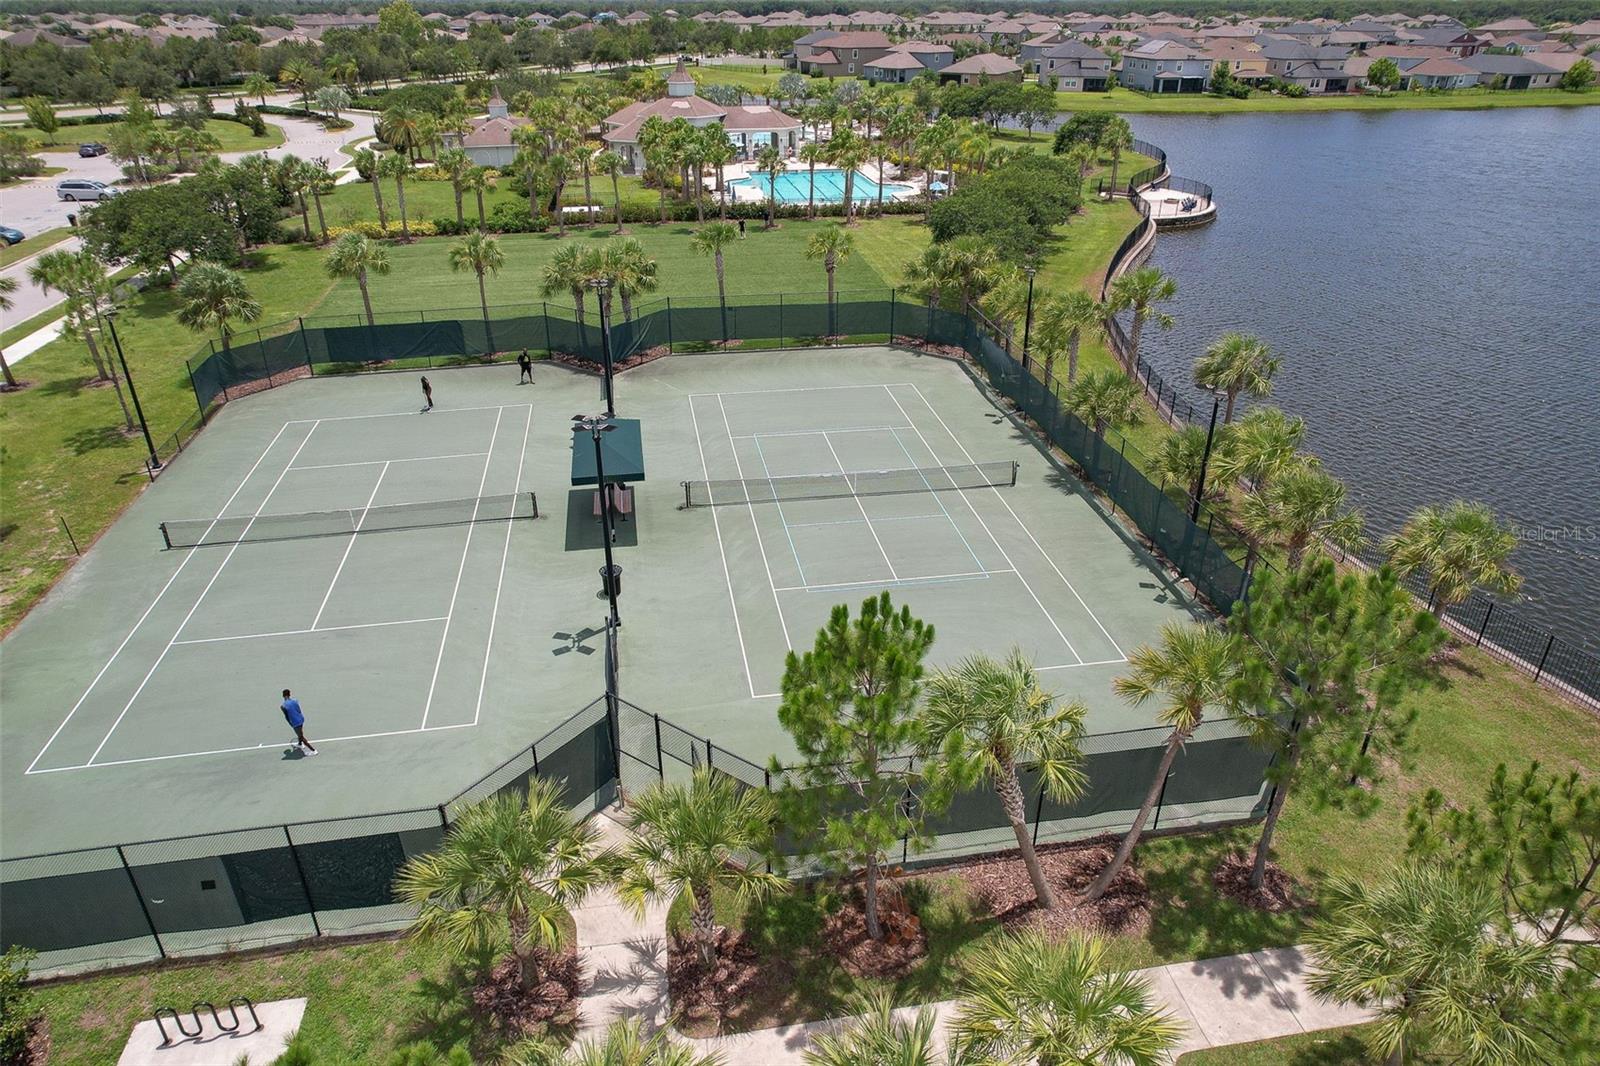 View of the double tennis courts, turfed sports field and pool complex.